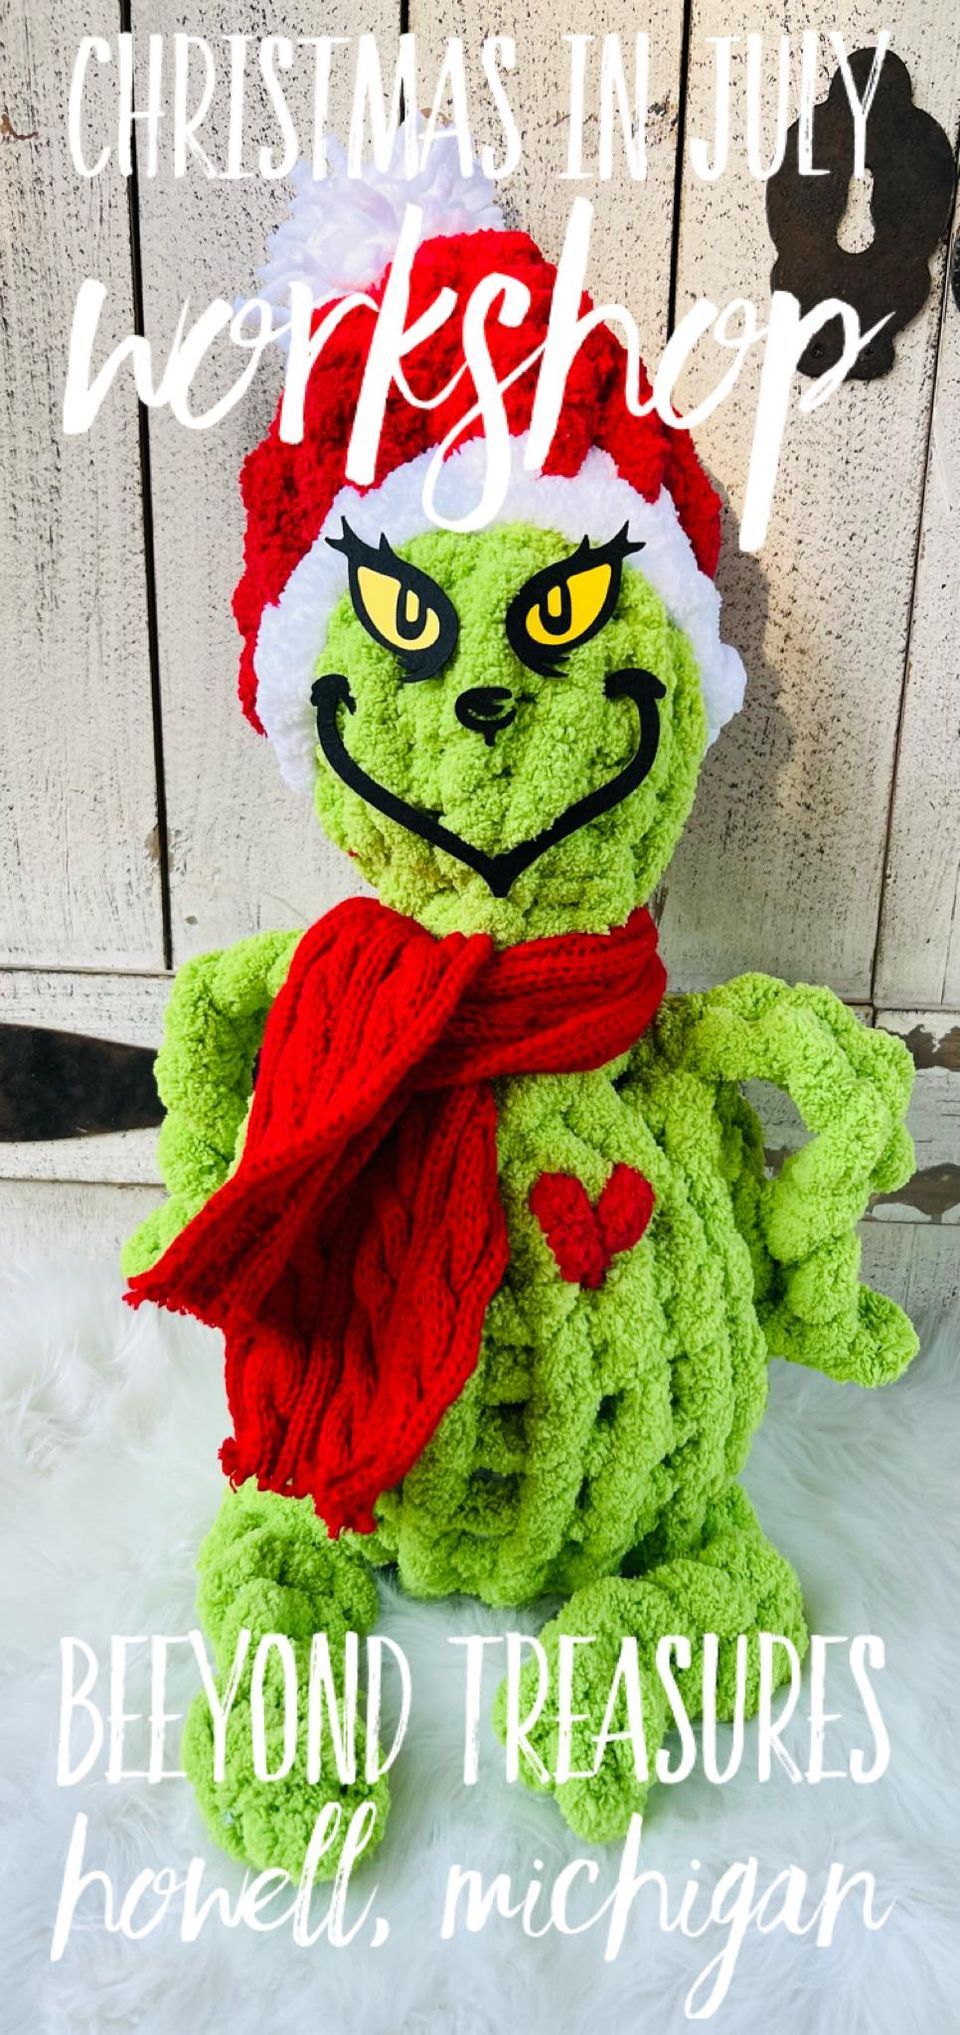 Green Guy Chunky Yarn Finger Knitted Character 7\/13 11:30am